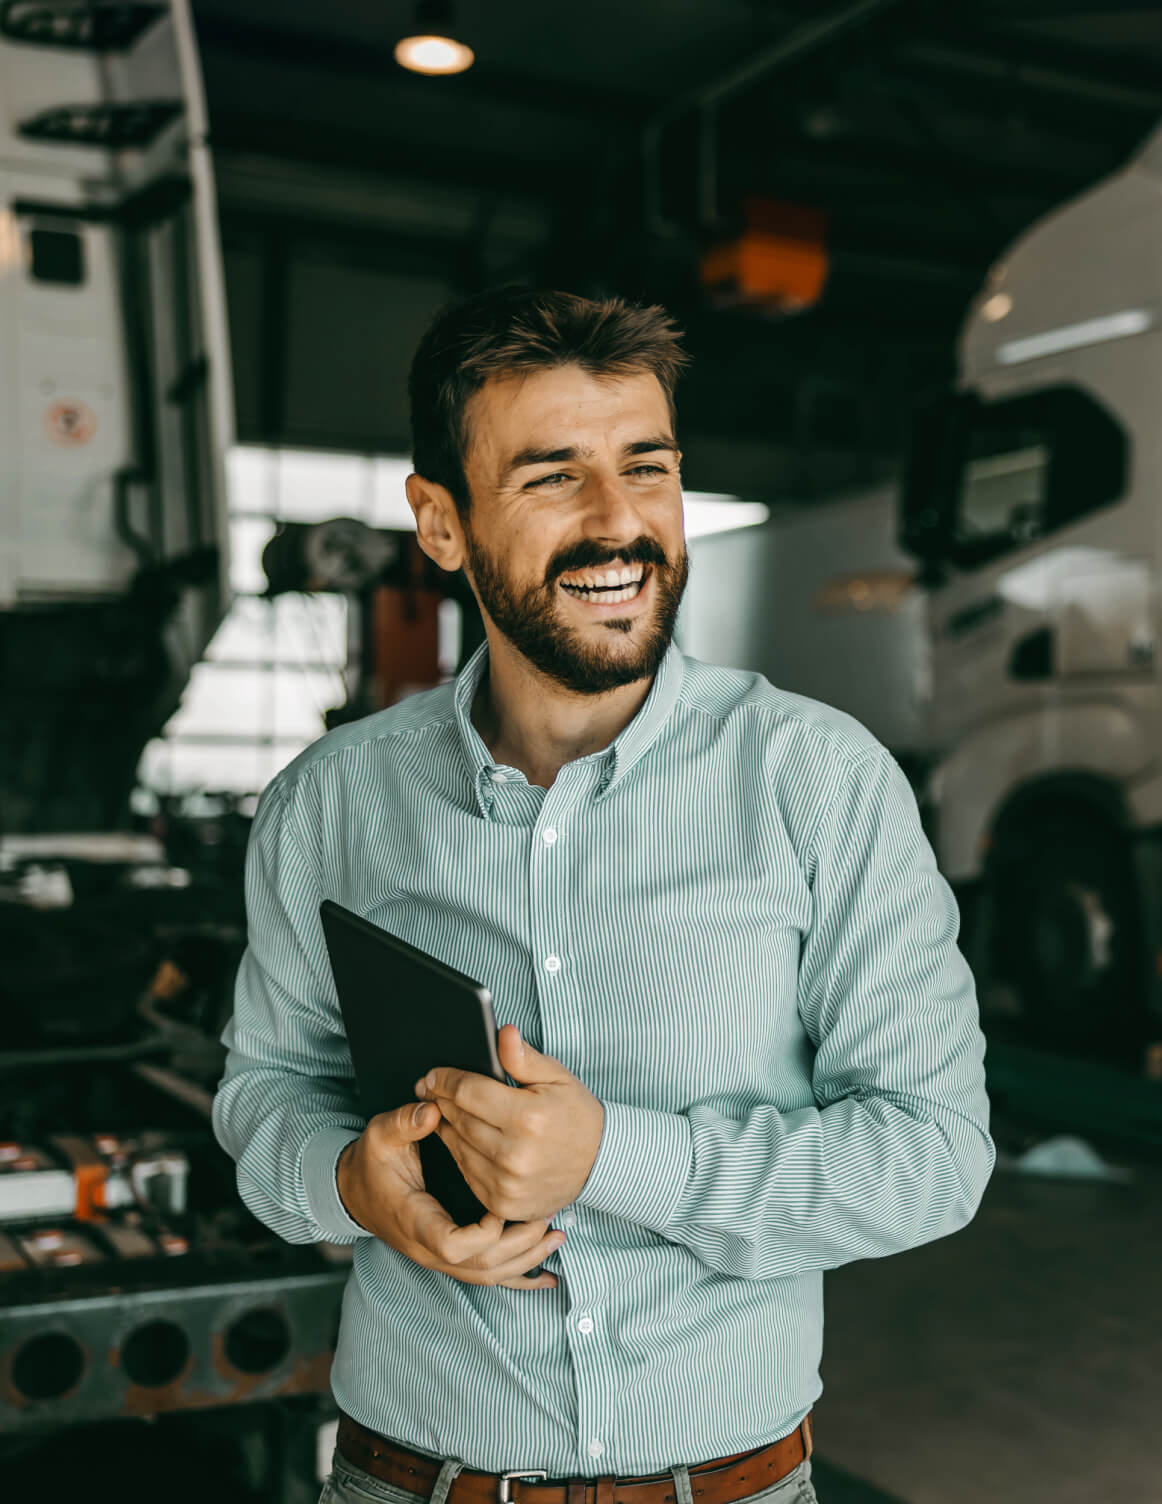 person smiling and holding an ipad in a vehicle hanger